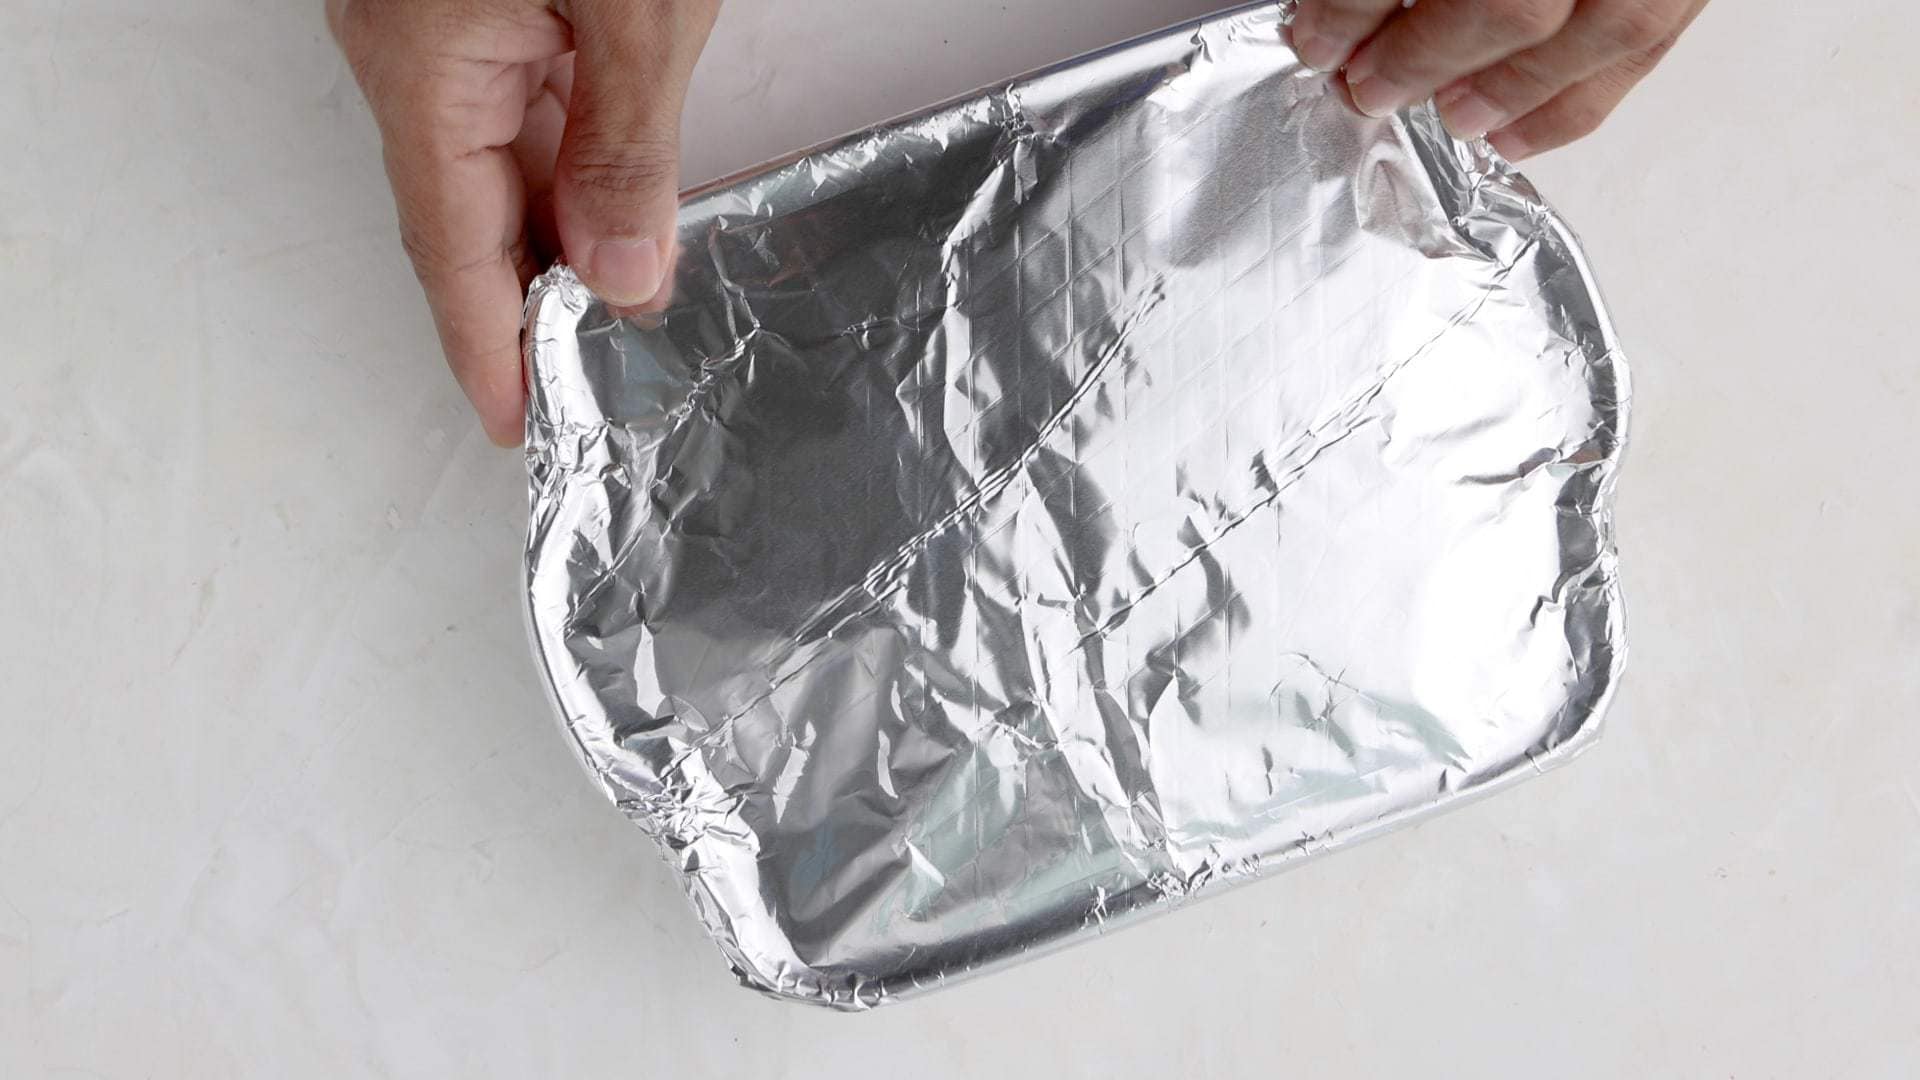 Wrapping with aluminum foil